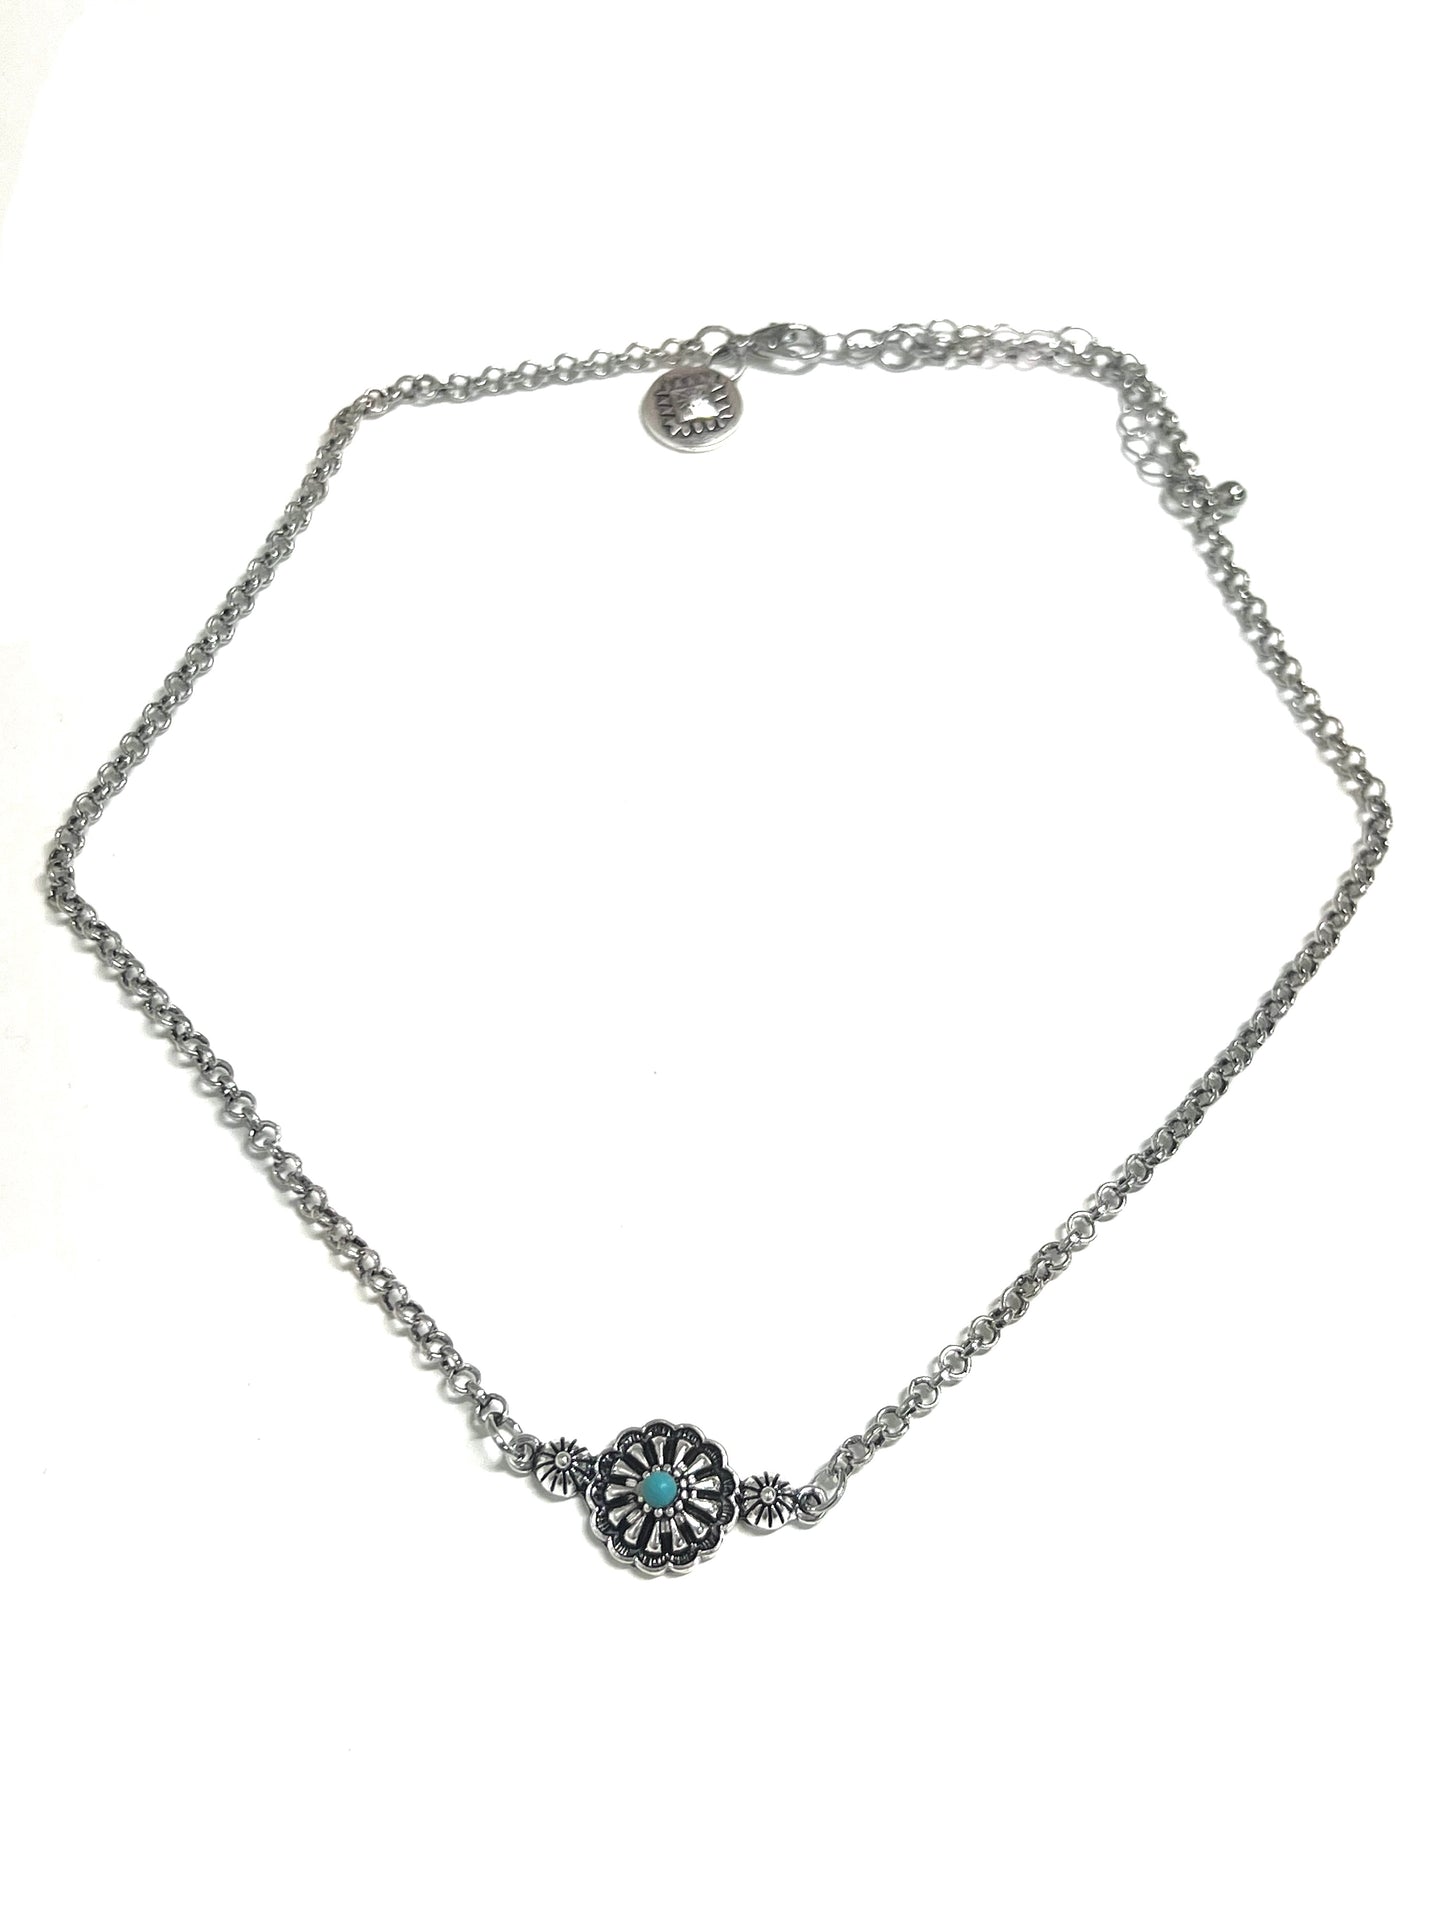 West and Co. 16" Chain Necklace with Flower Concho Pendant-Necklaces-West and Co.--The Twisted Chandelier